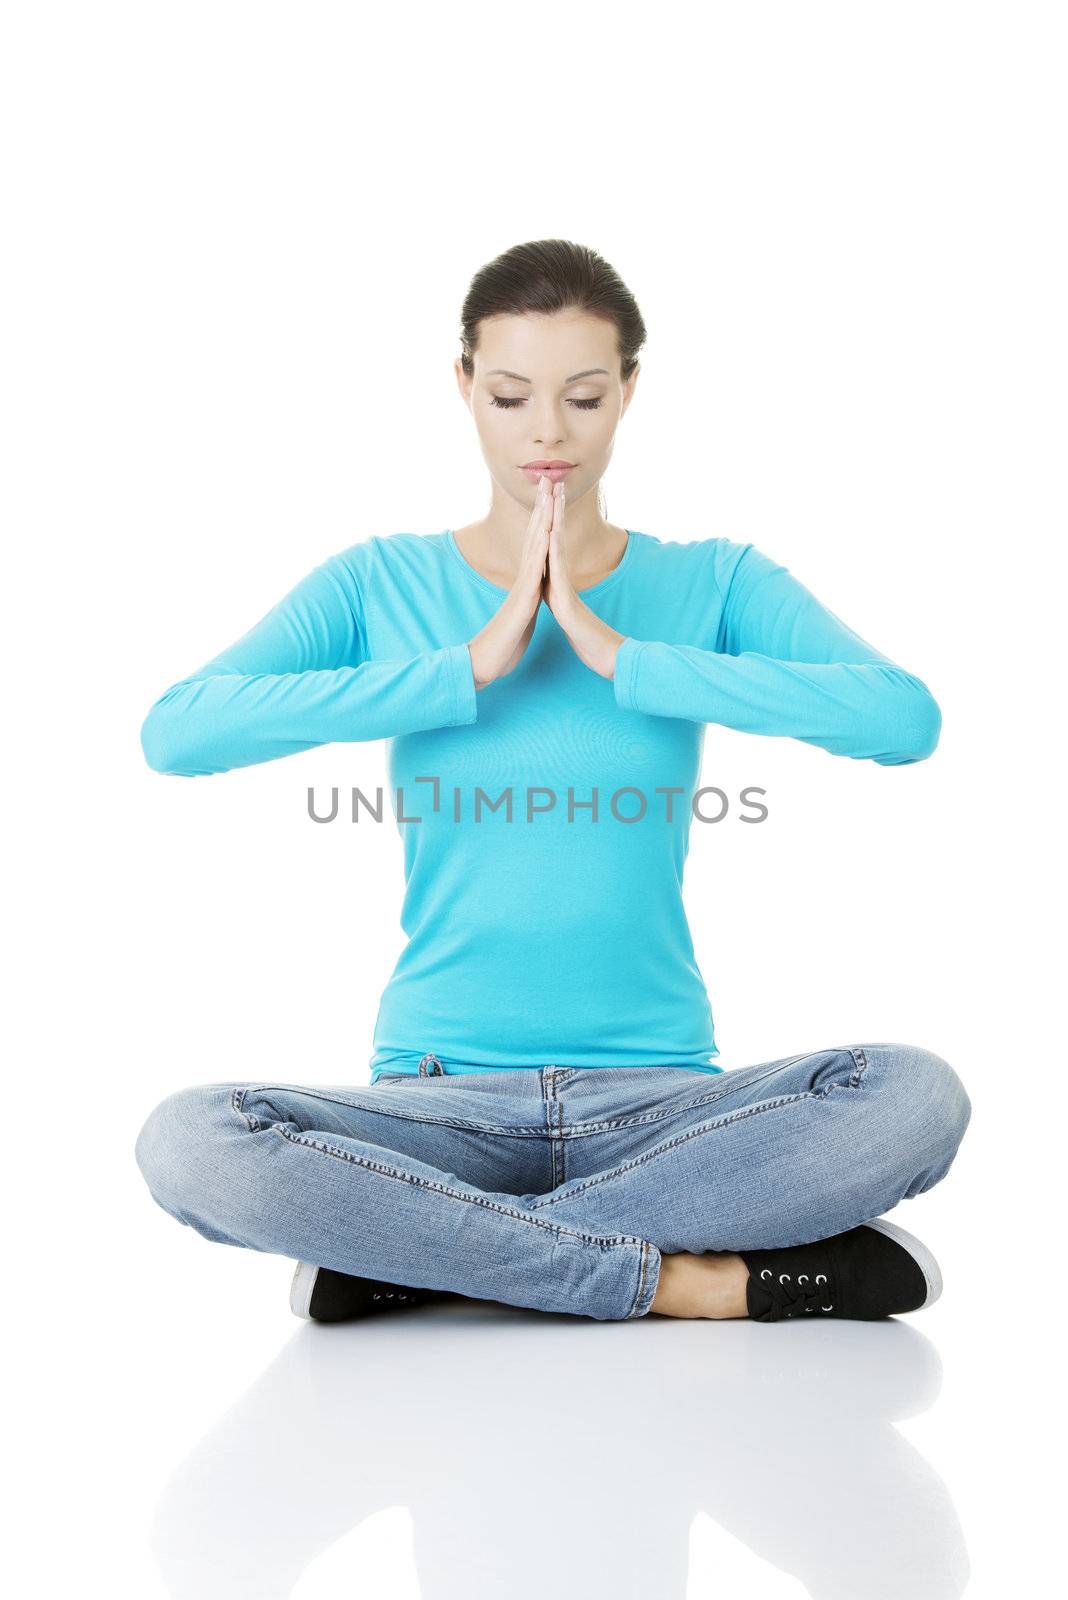 Portrait of young pretty student girl over white background meditating in lotus pose. She is relaxed and concentrated